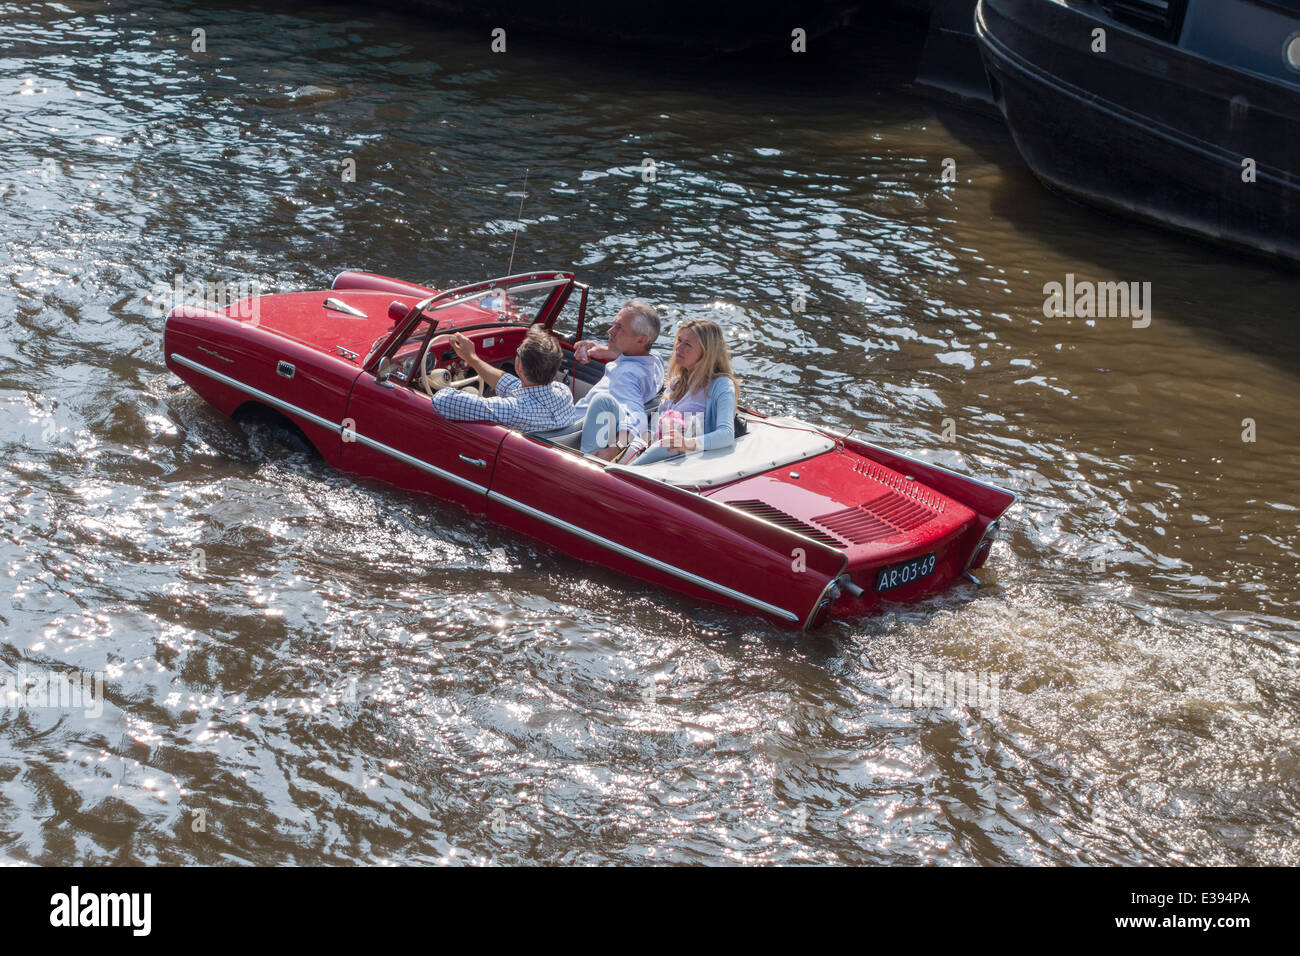 vintage-amphicar-770-in-an-amsterdam-can